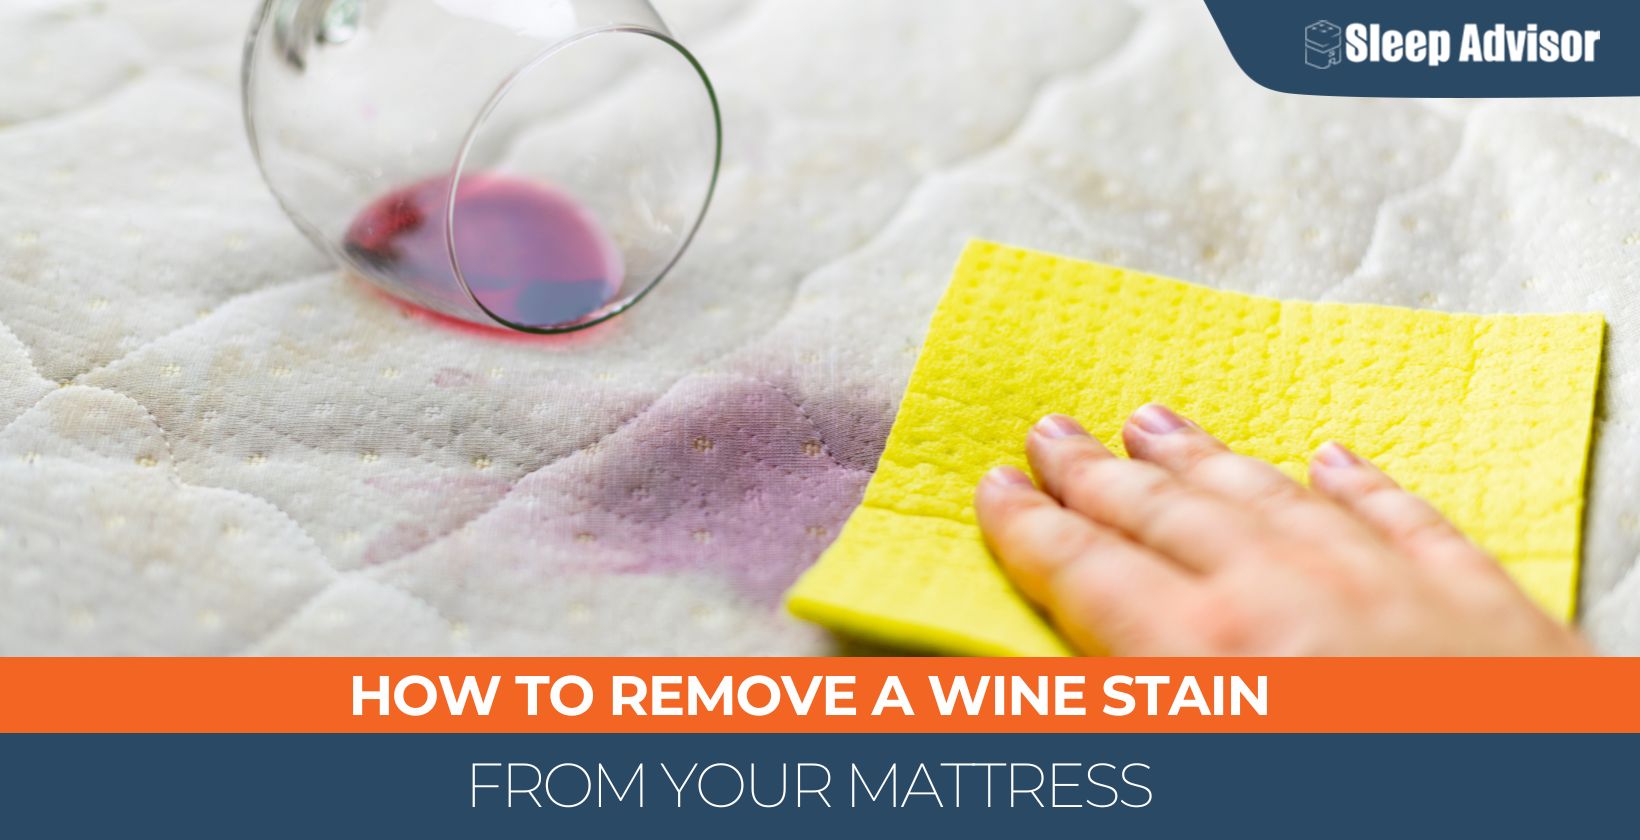 How to Remove a Wine Stain from Your Mattress